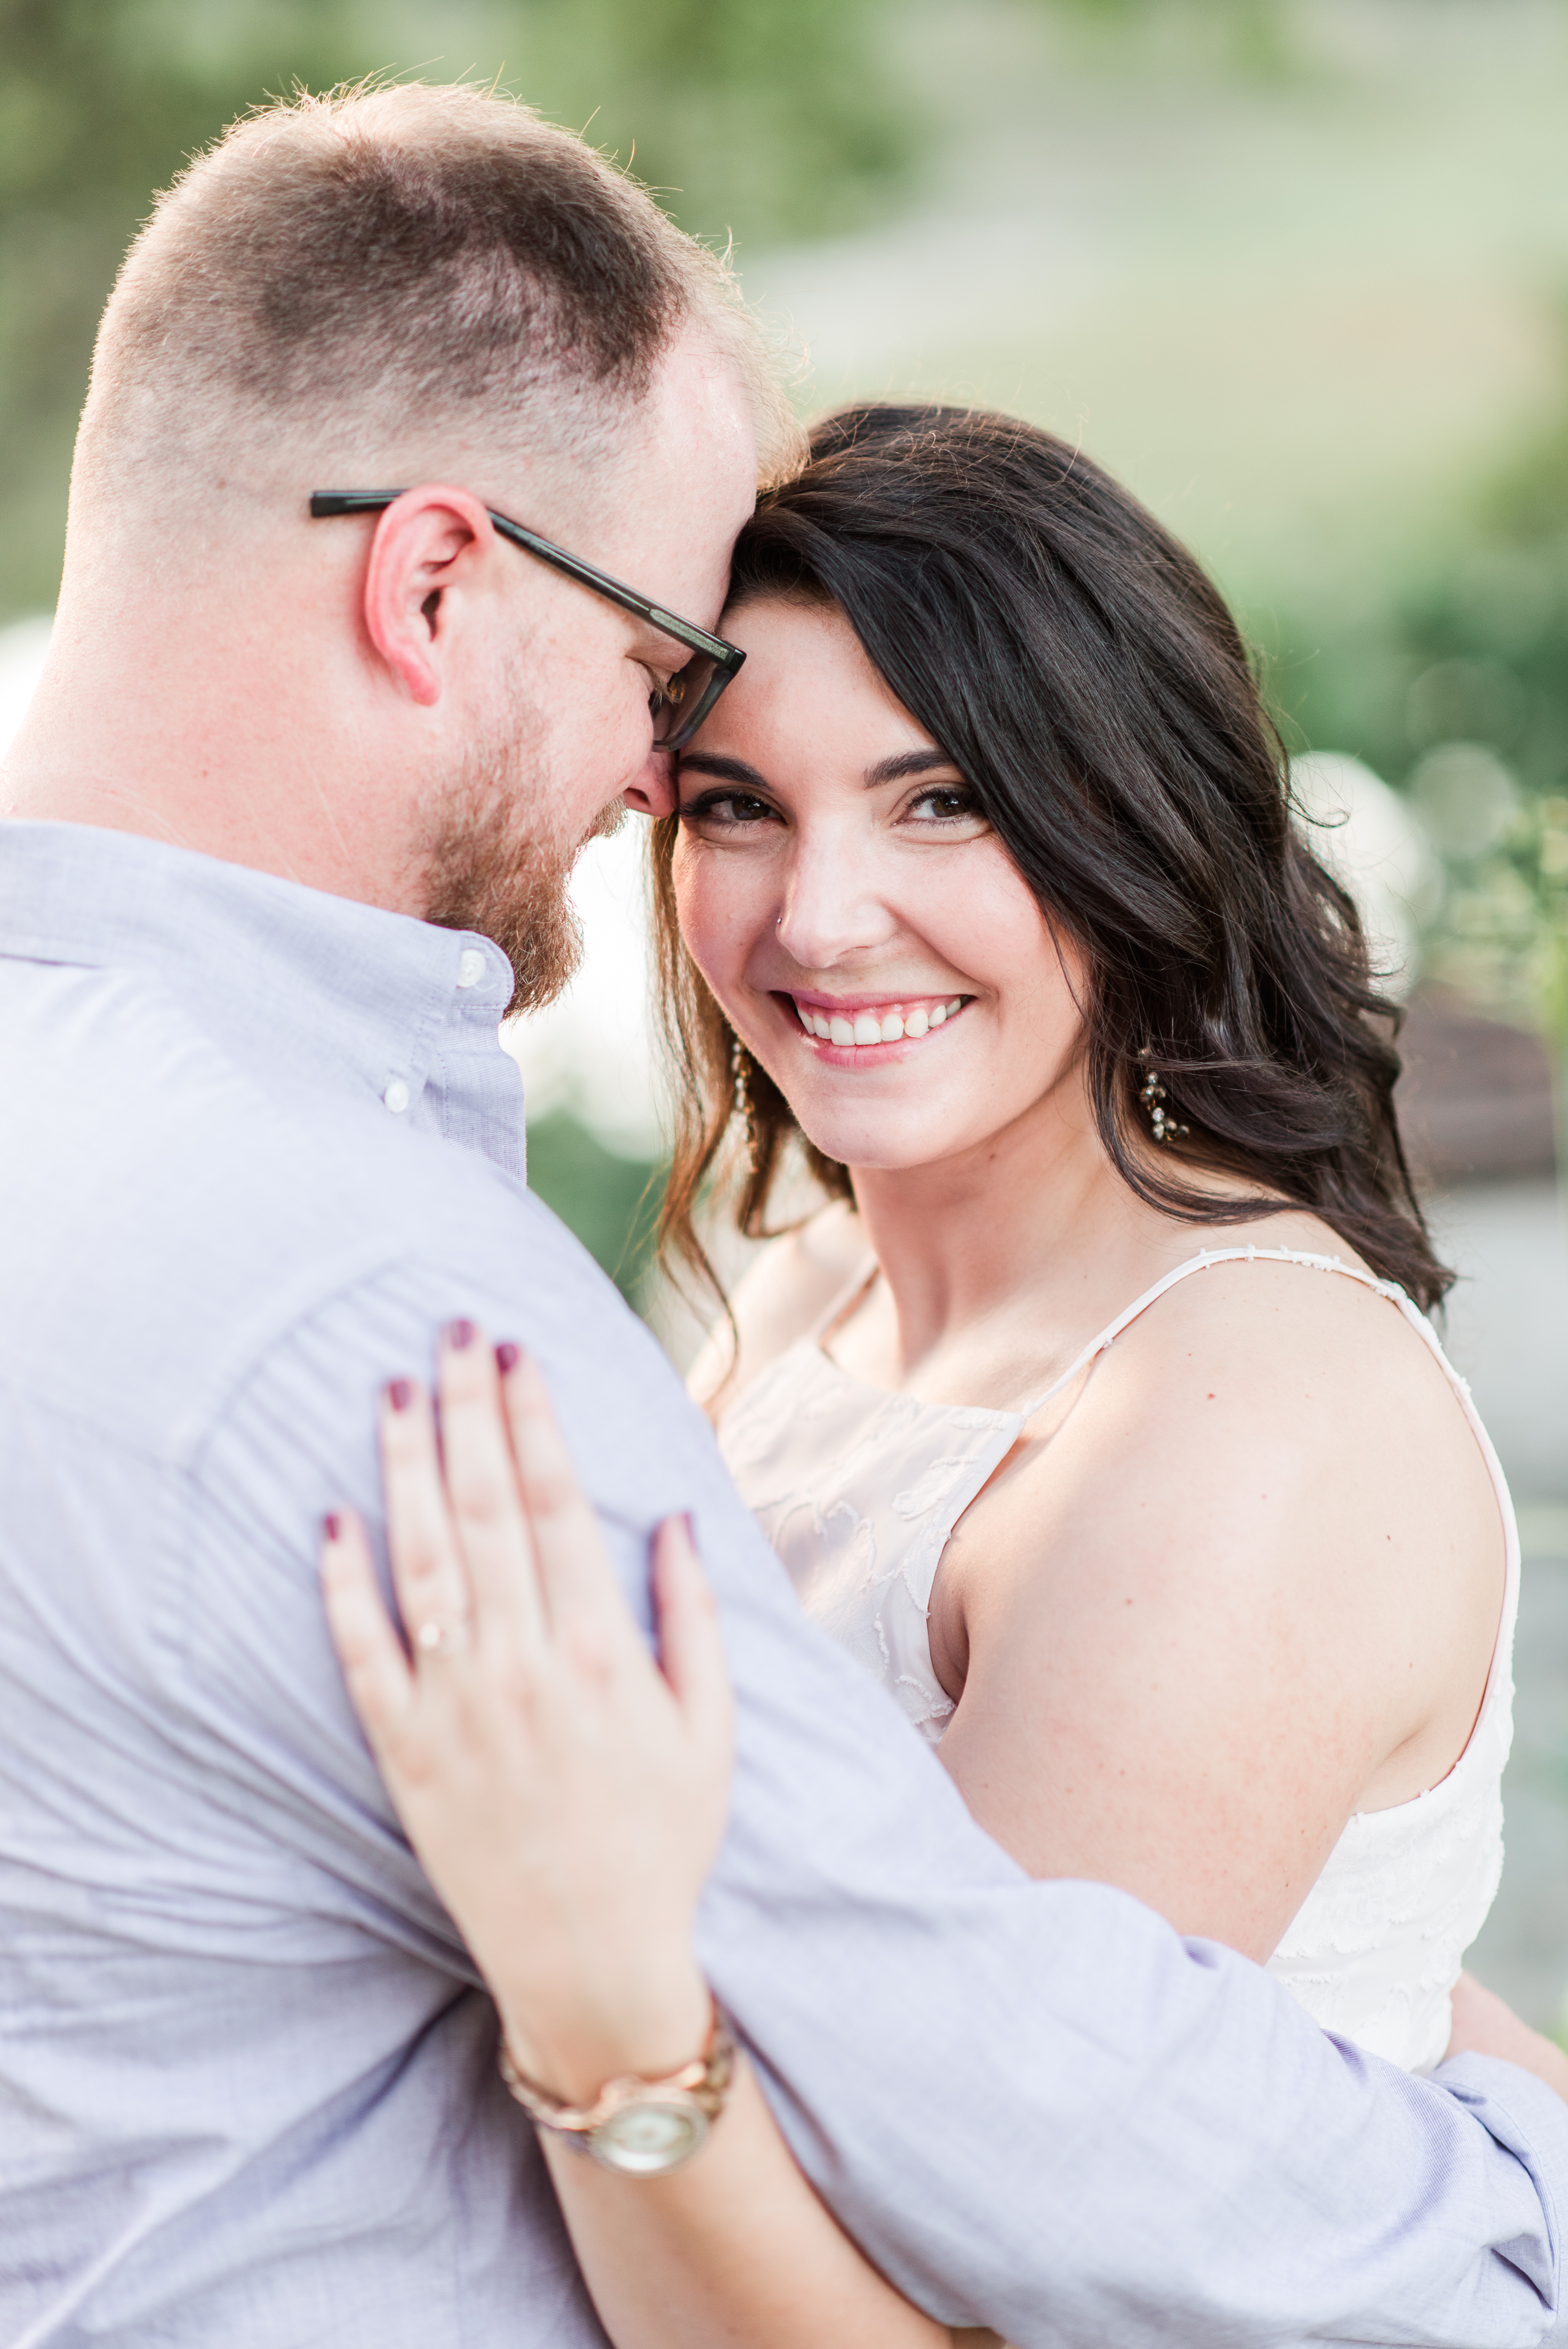 Summer Lake Contestee Nature Park Engagement Session